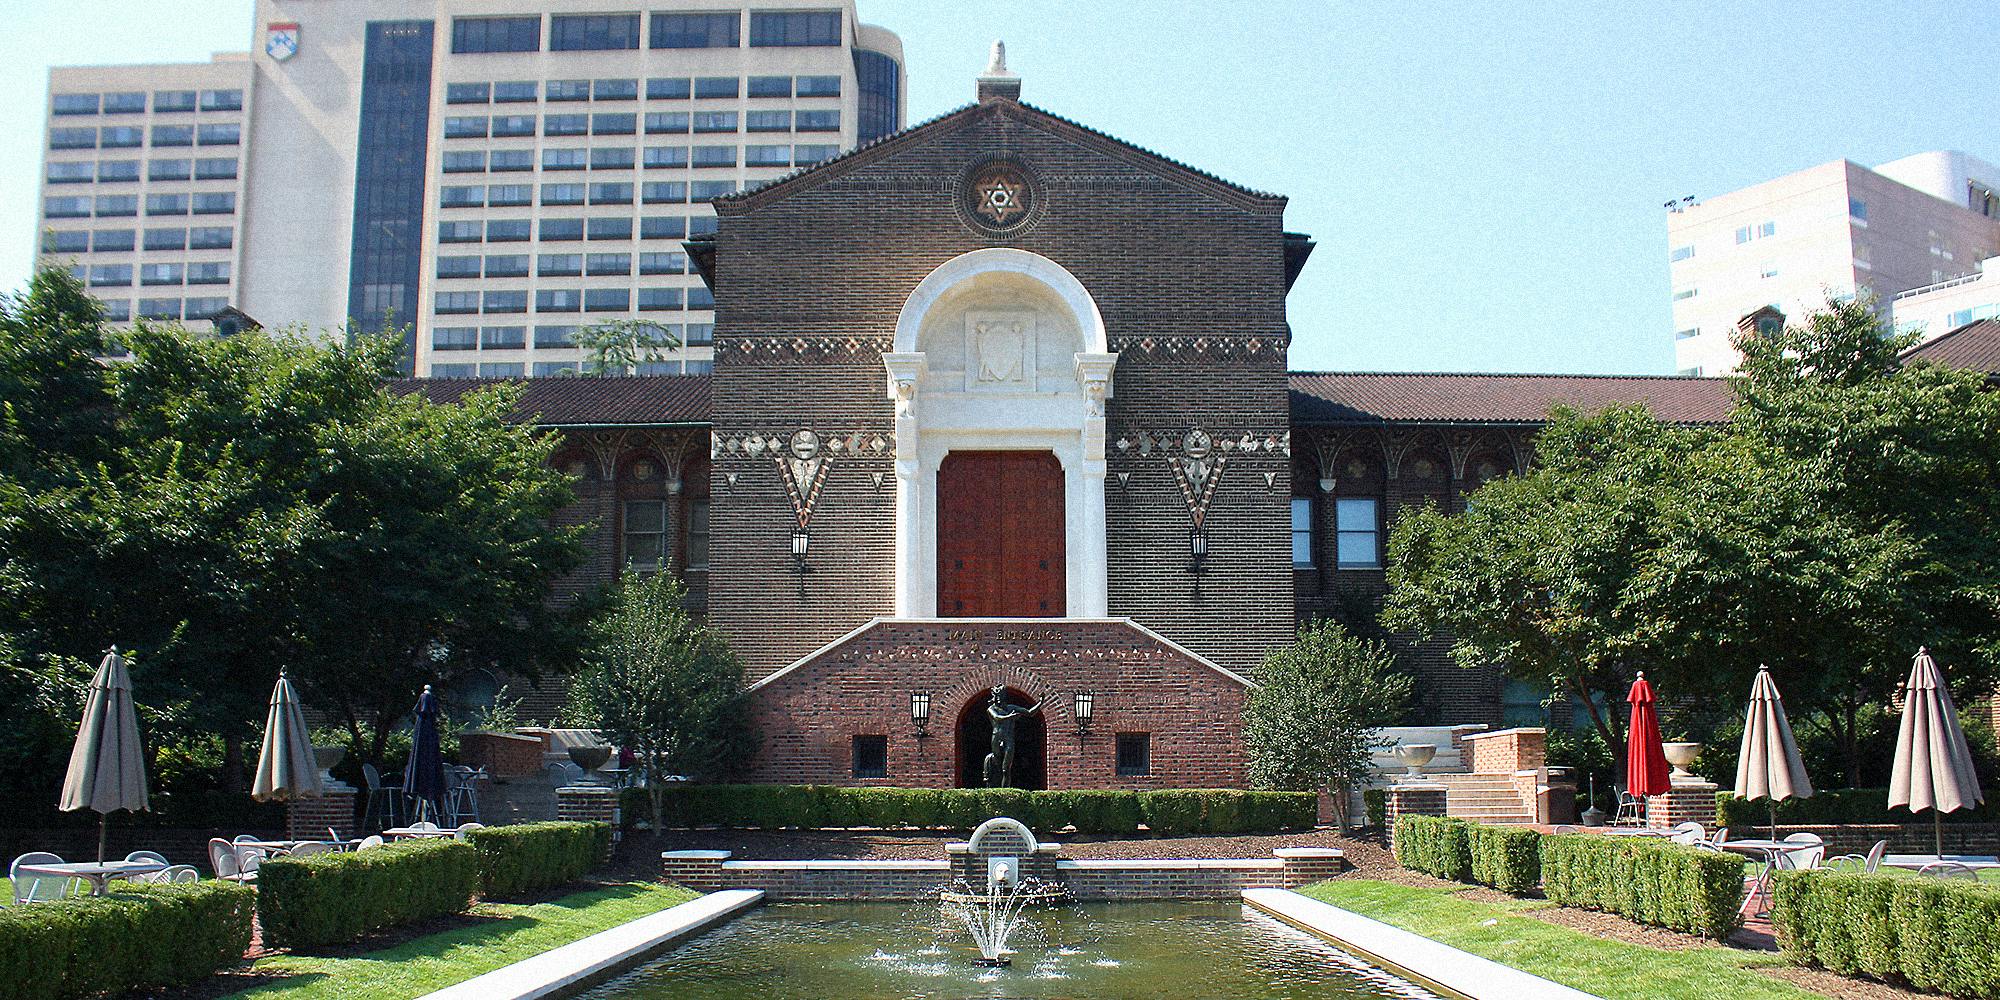 The exterior of a museum with water fountain in foreground.